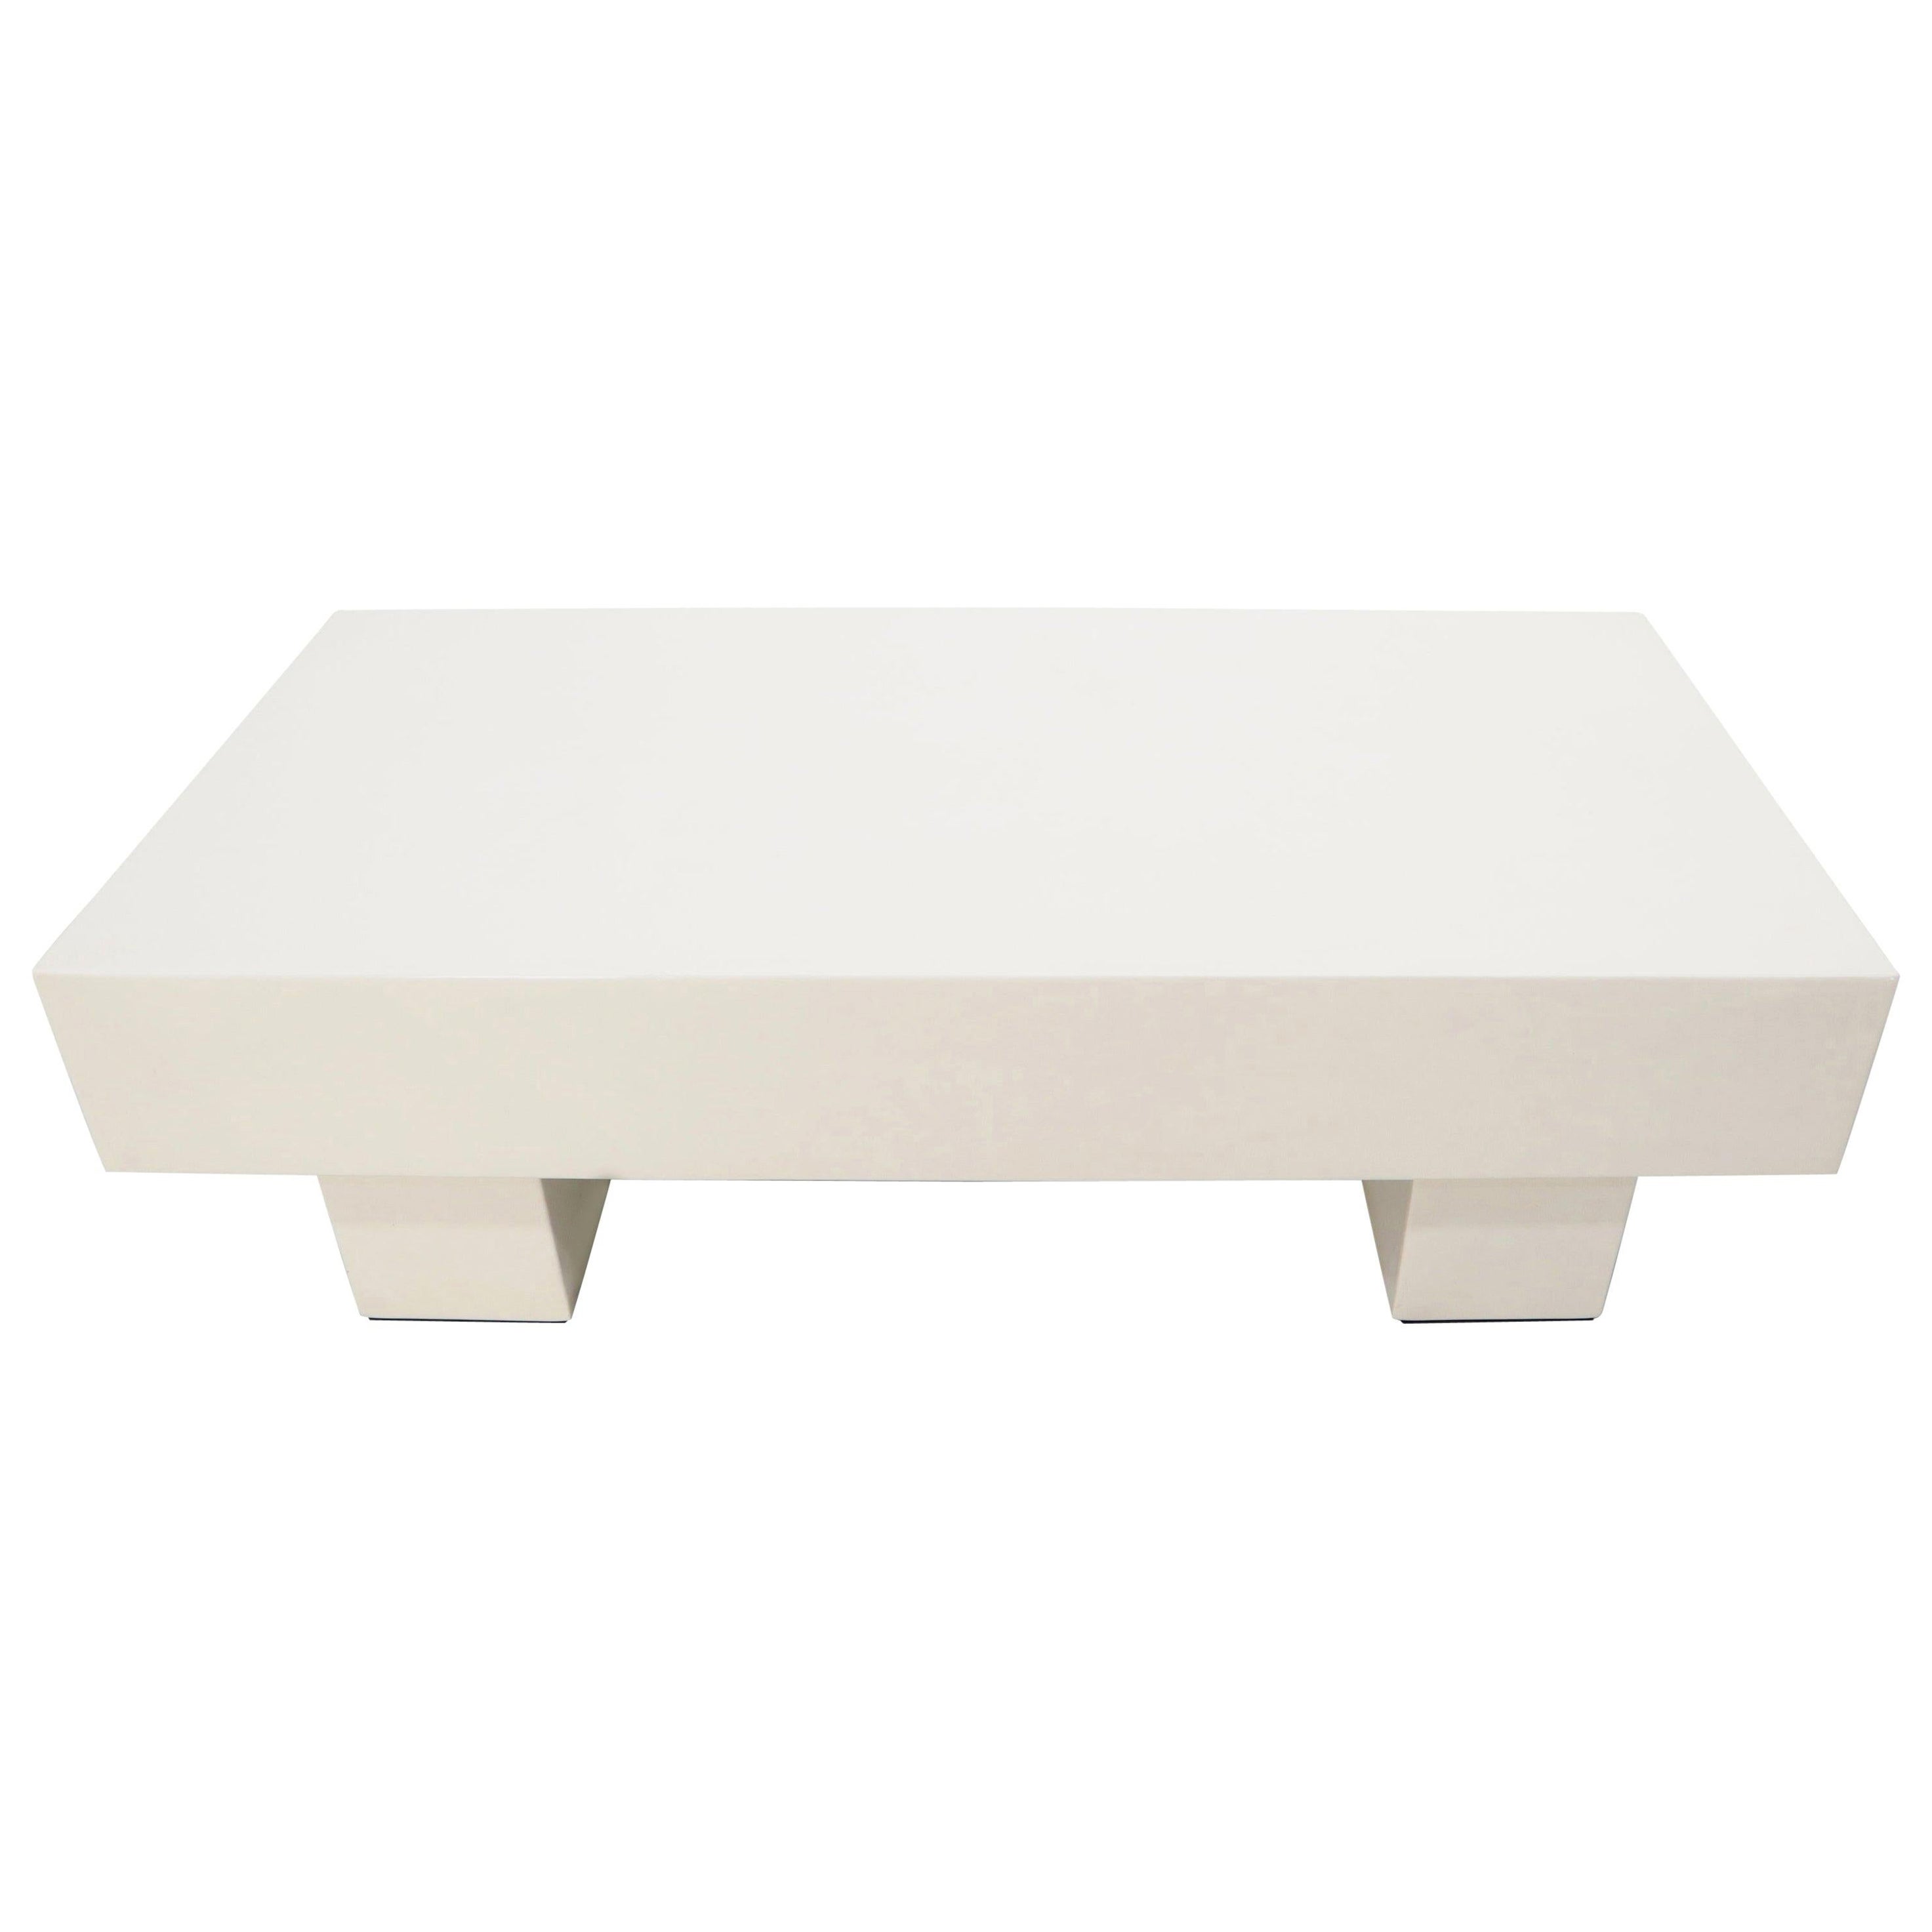 Mid Century Modern Double Pedestal Thick Cream Off-White Lacquer Coffee Table For Sale